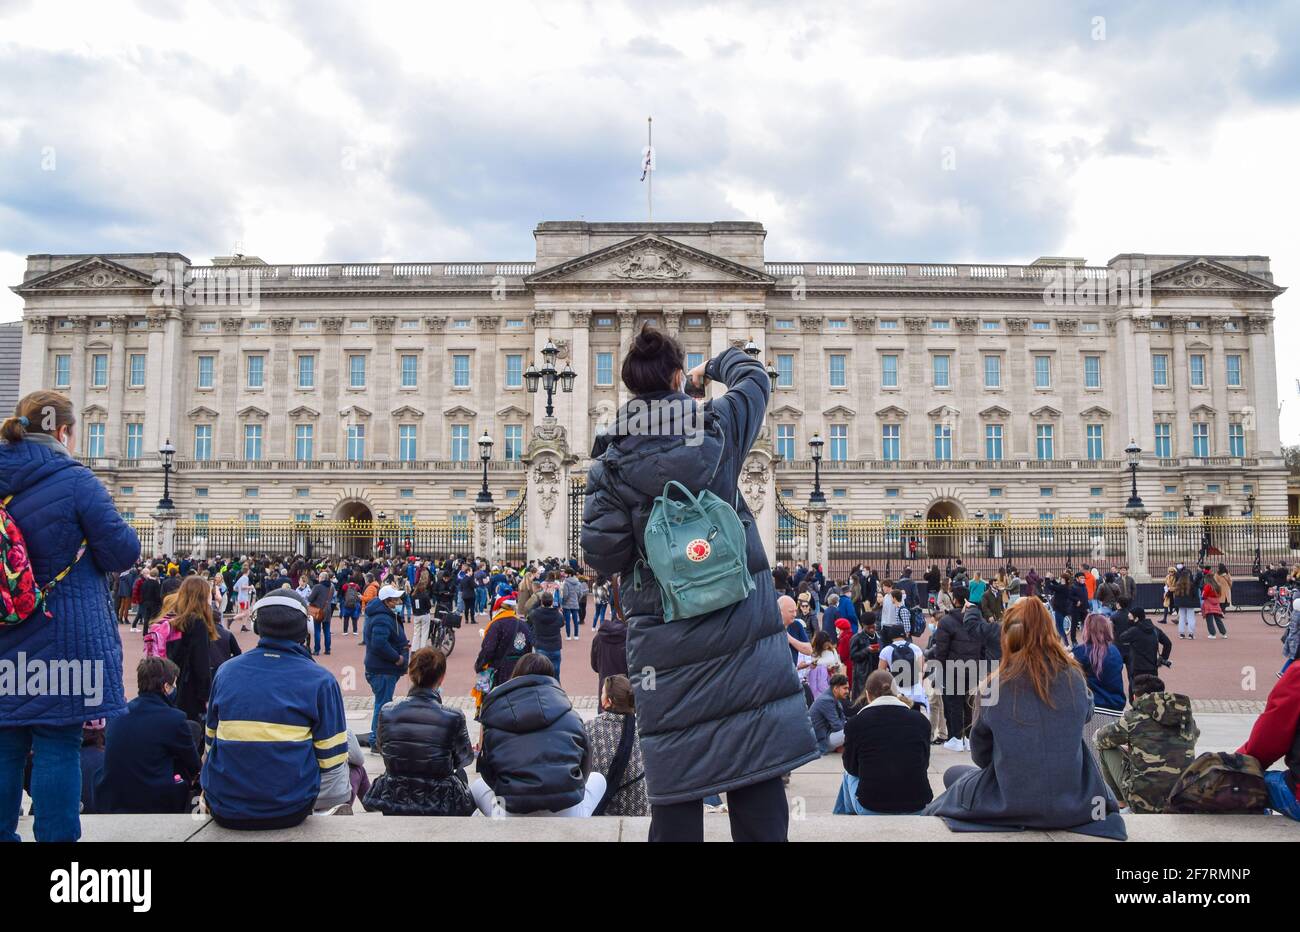 London, United Kingdom. 9th April 2021. Crowds gather outside Buckingham Palace in tribute to Prince Philip. The Duke of Edinburgh died today, aged 99. Credit: Vuk Valcic/Alamy Live News Stock Photo